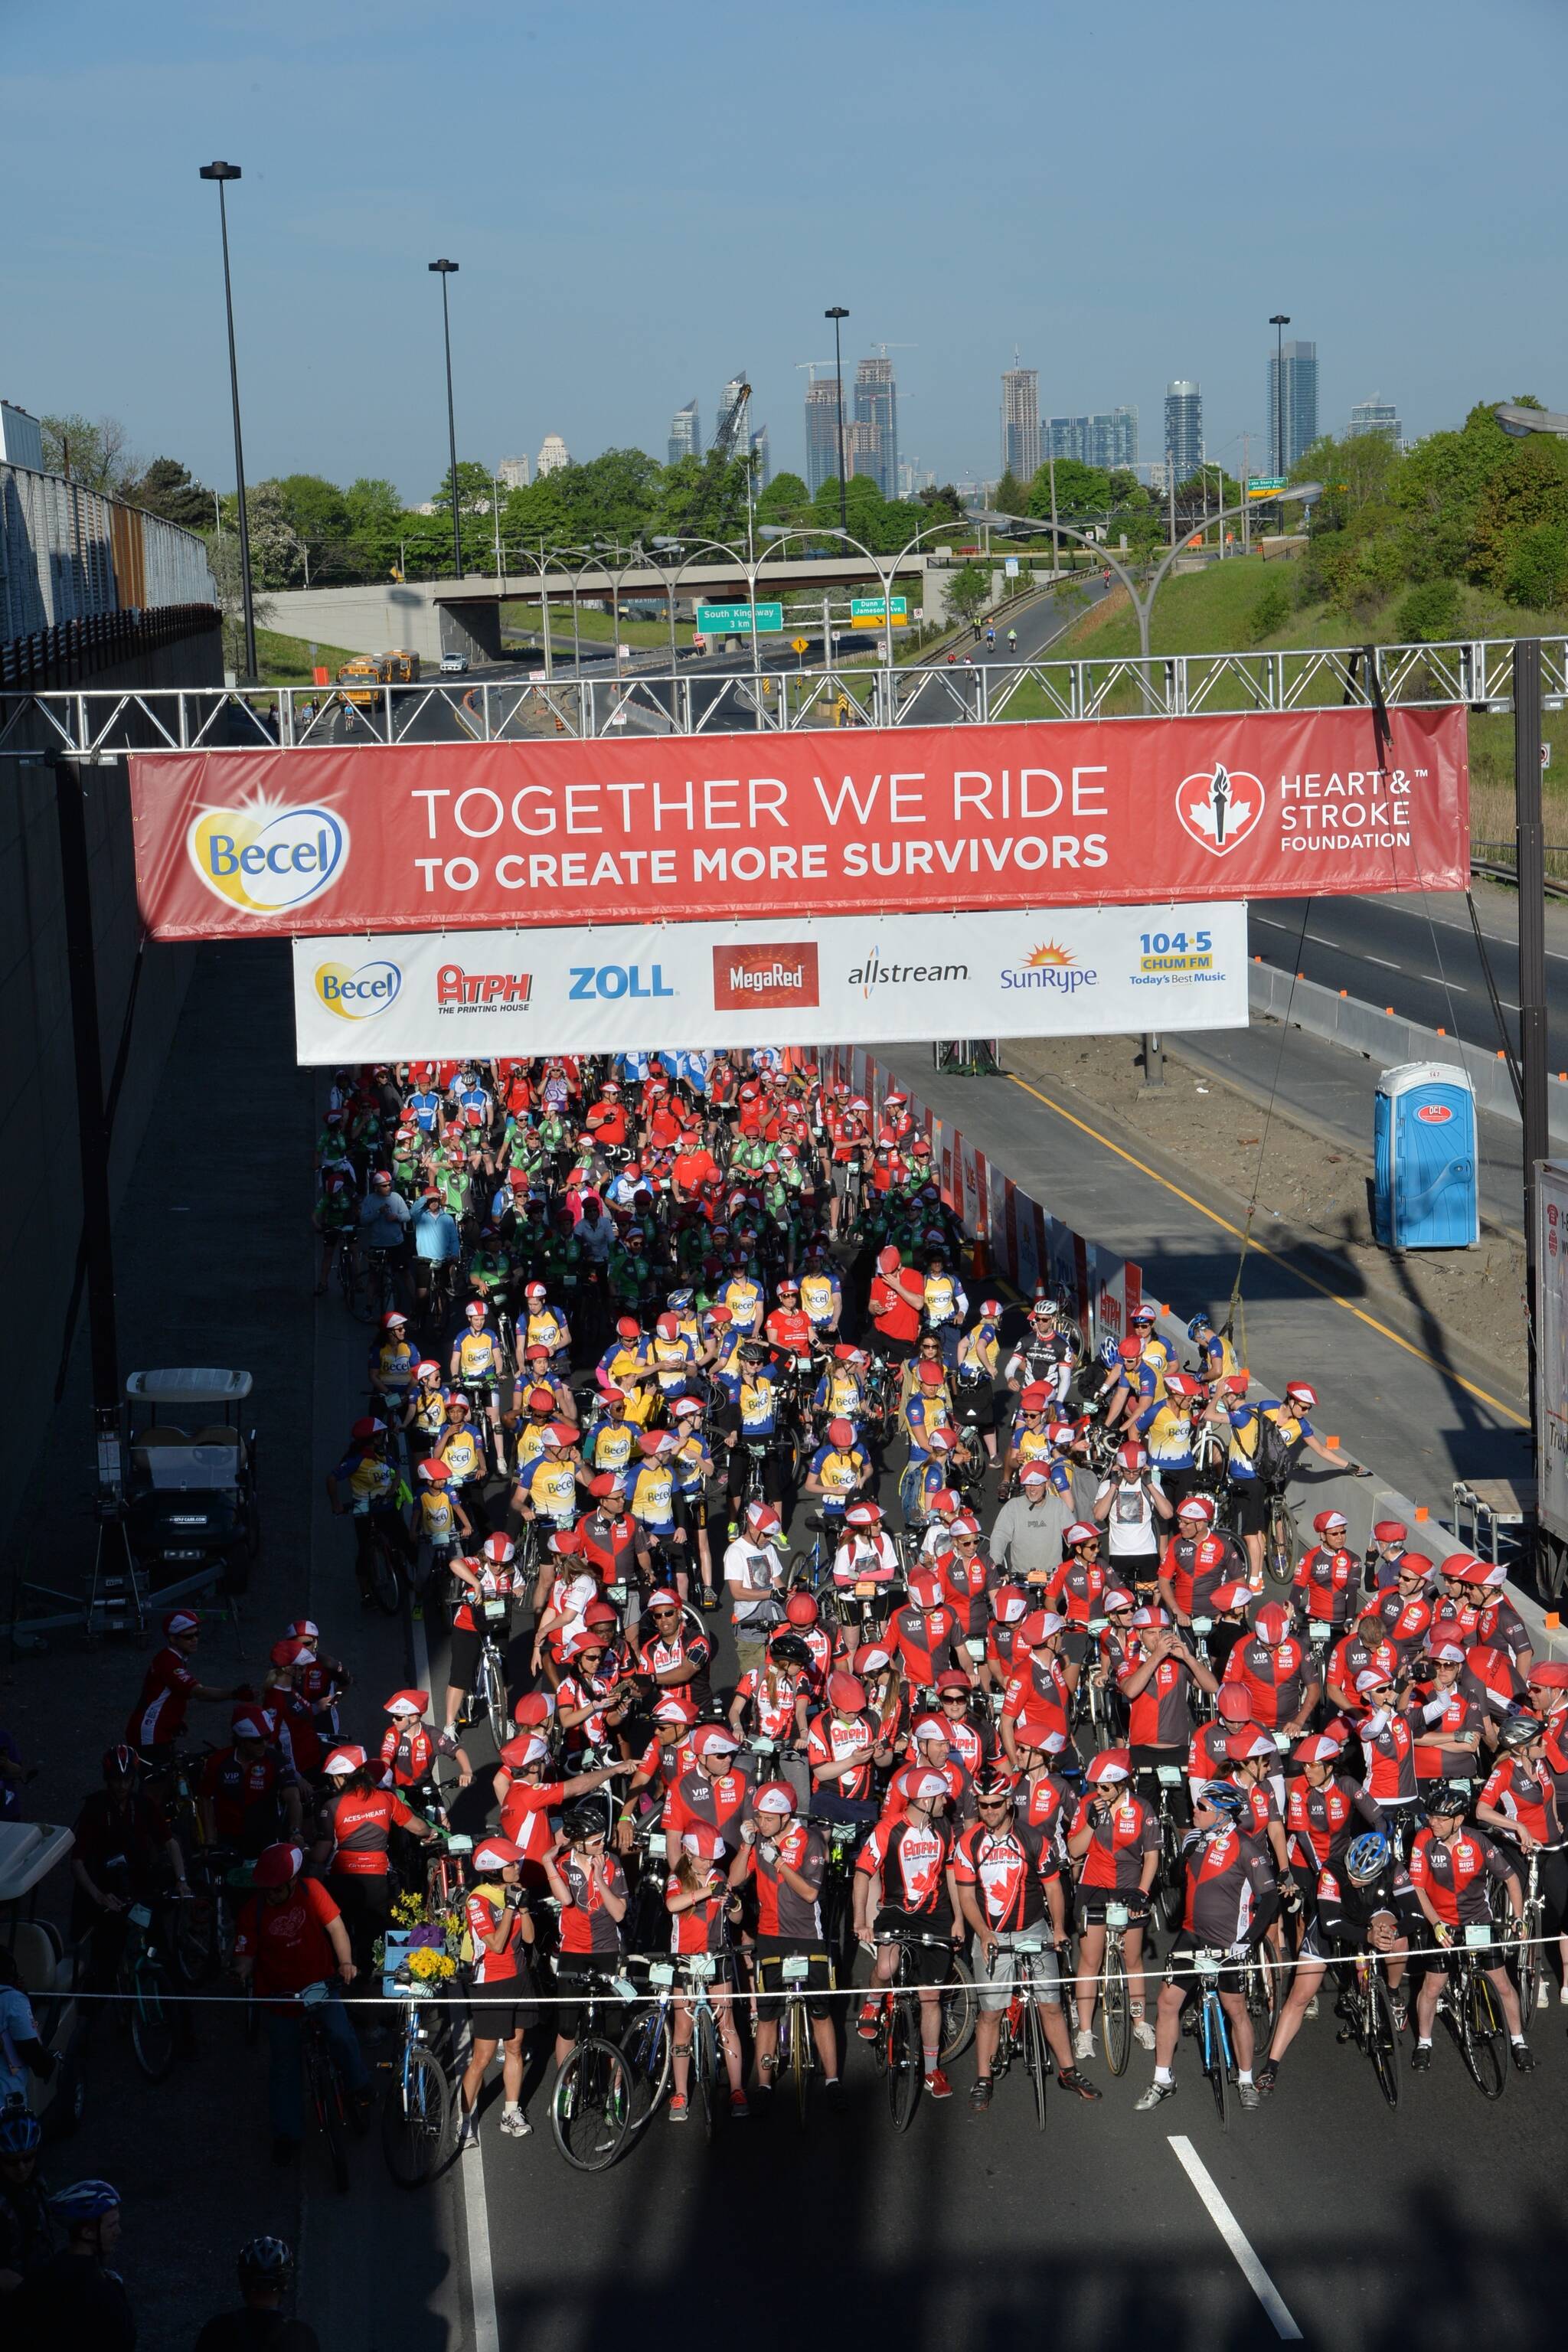 The 28th Annual Becel Heart&Stroke Ride for Heart